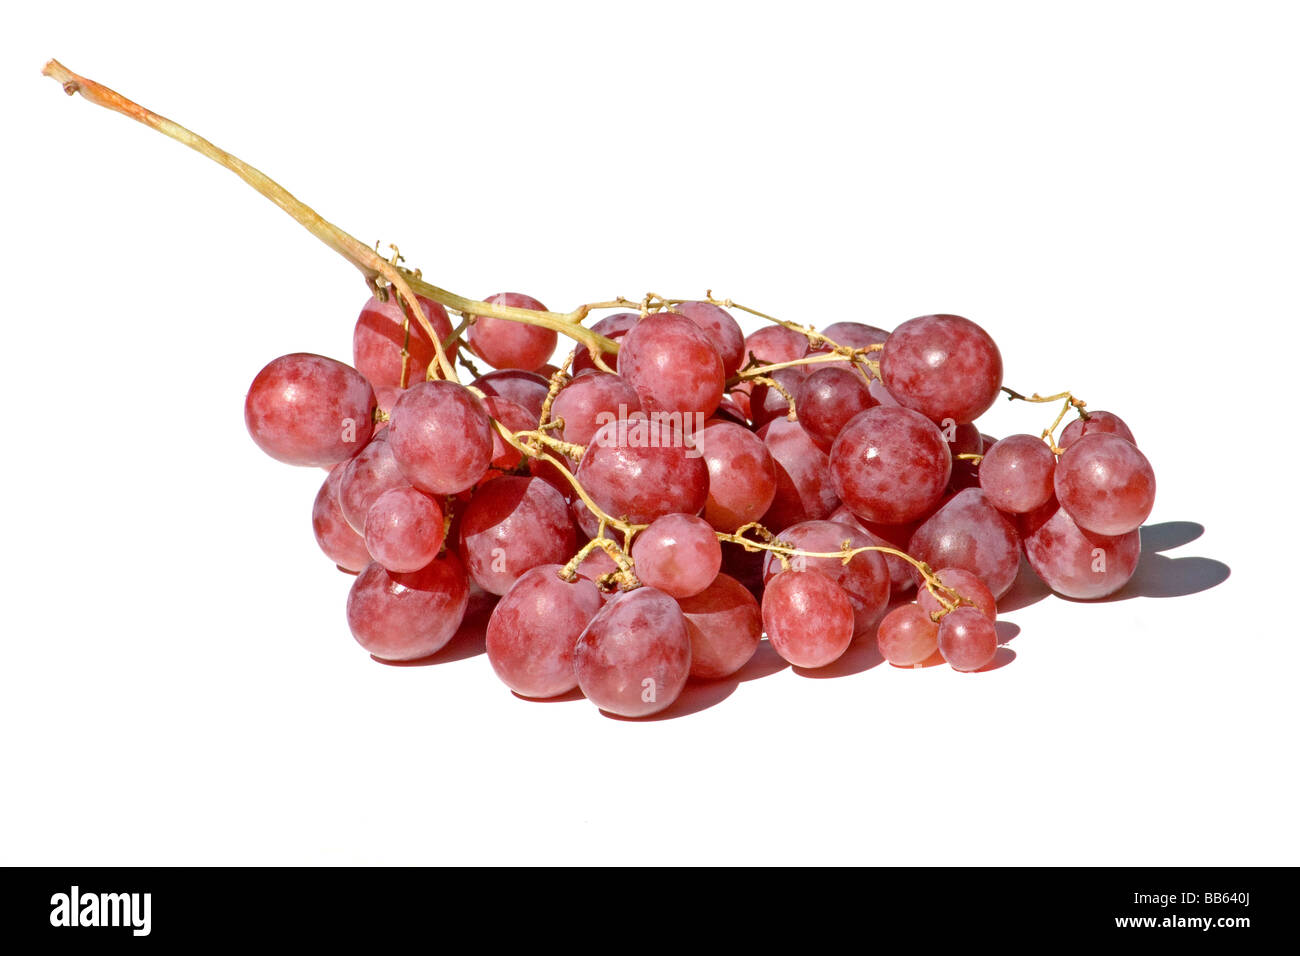 Red grapes on white background Stock Photo